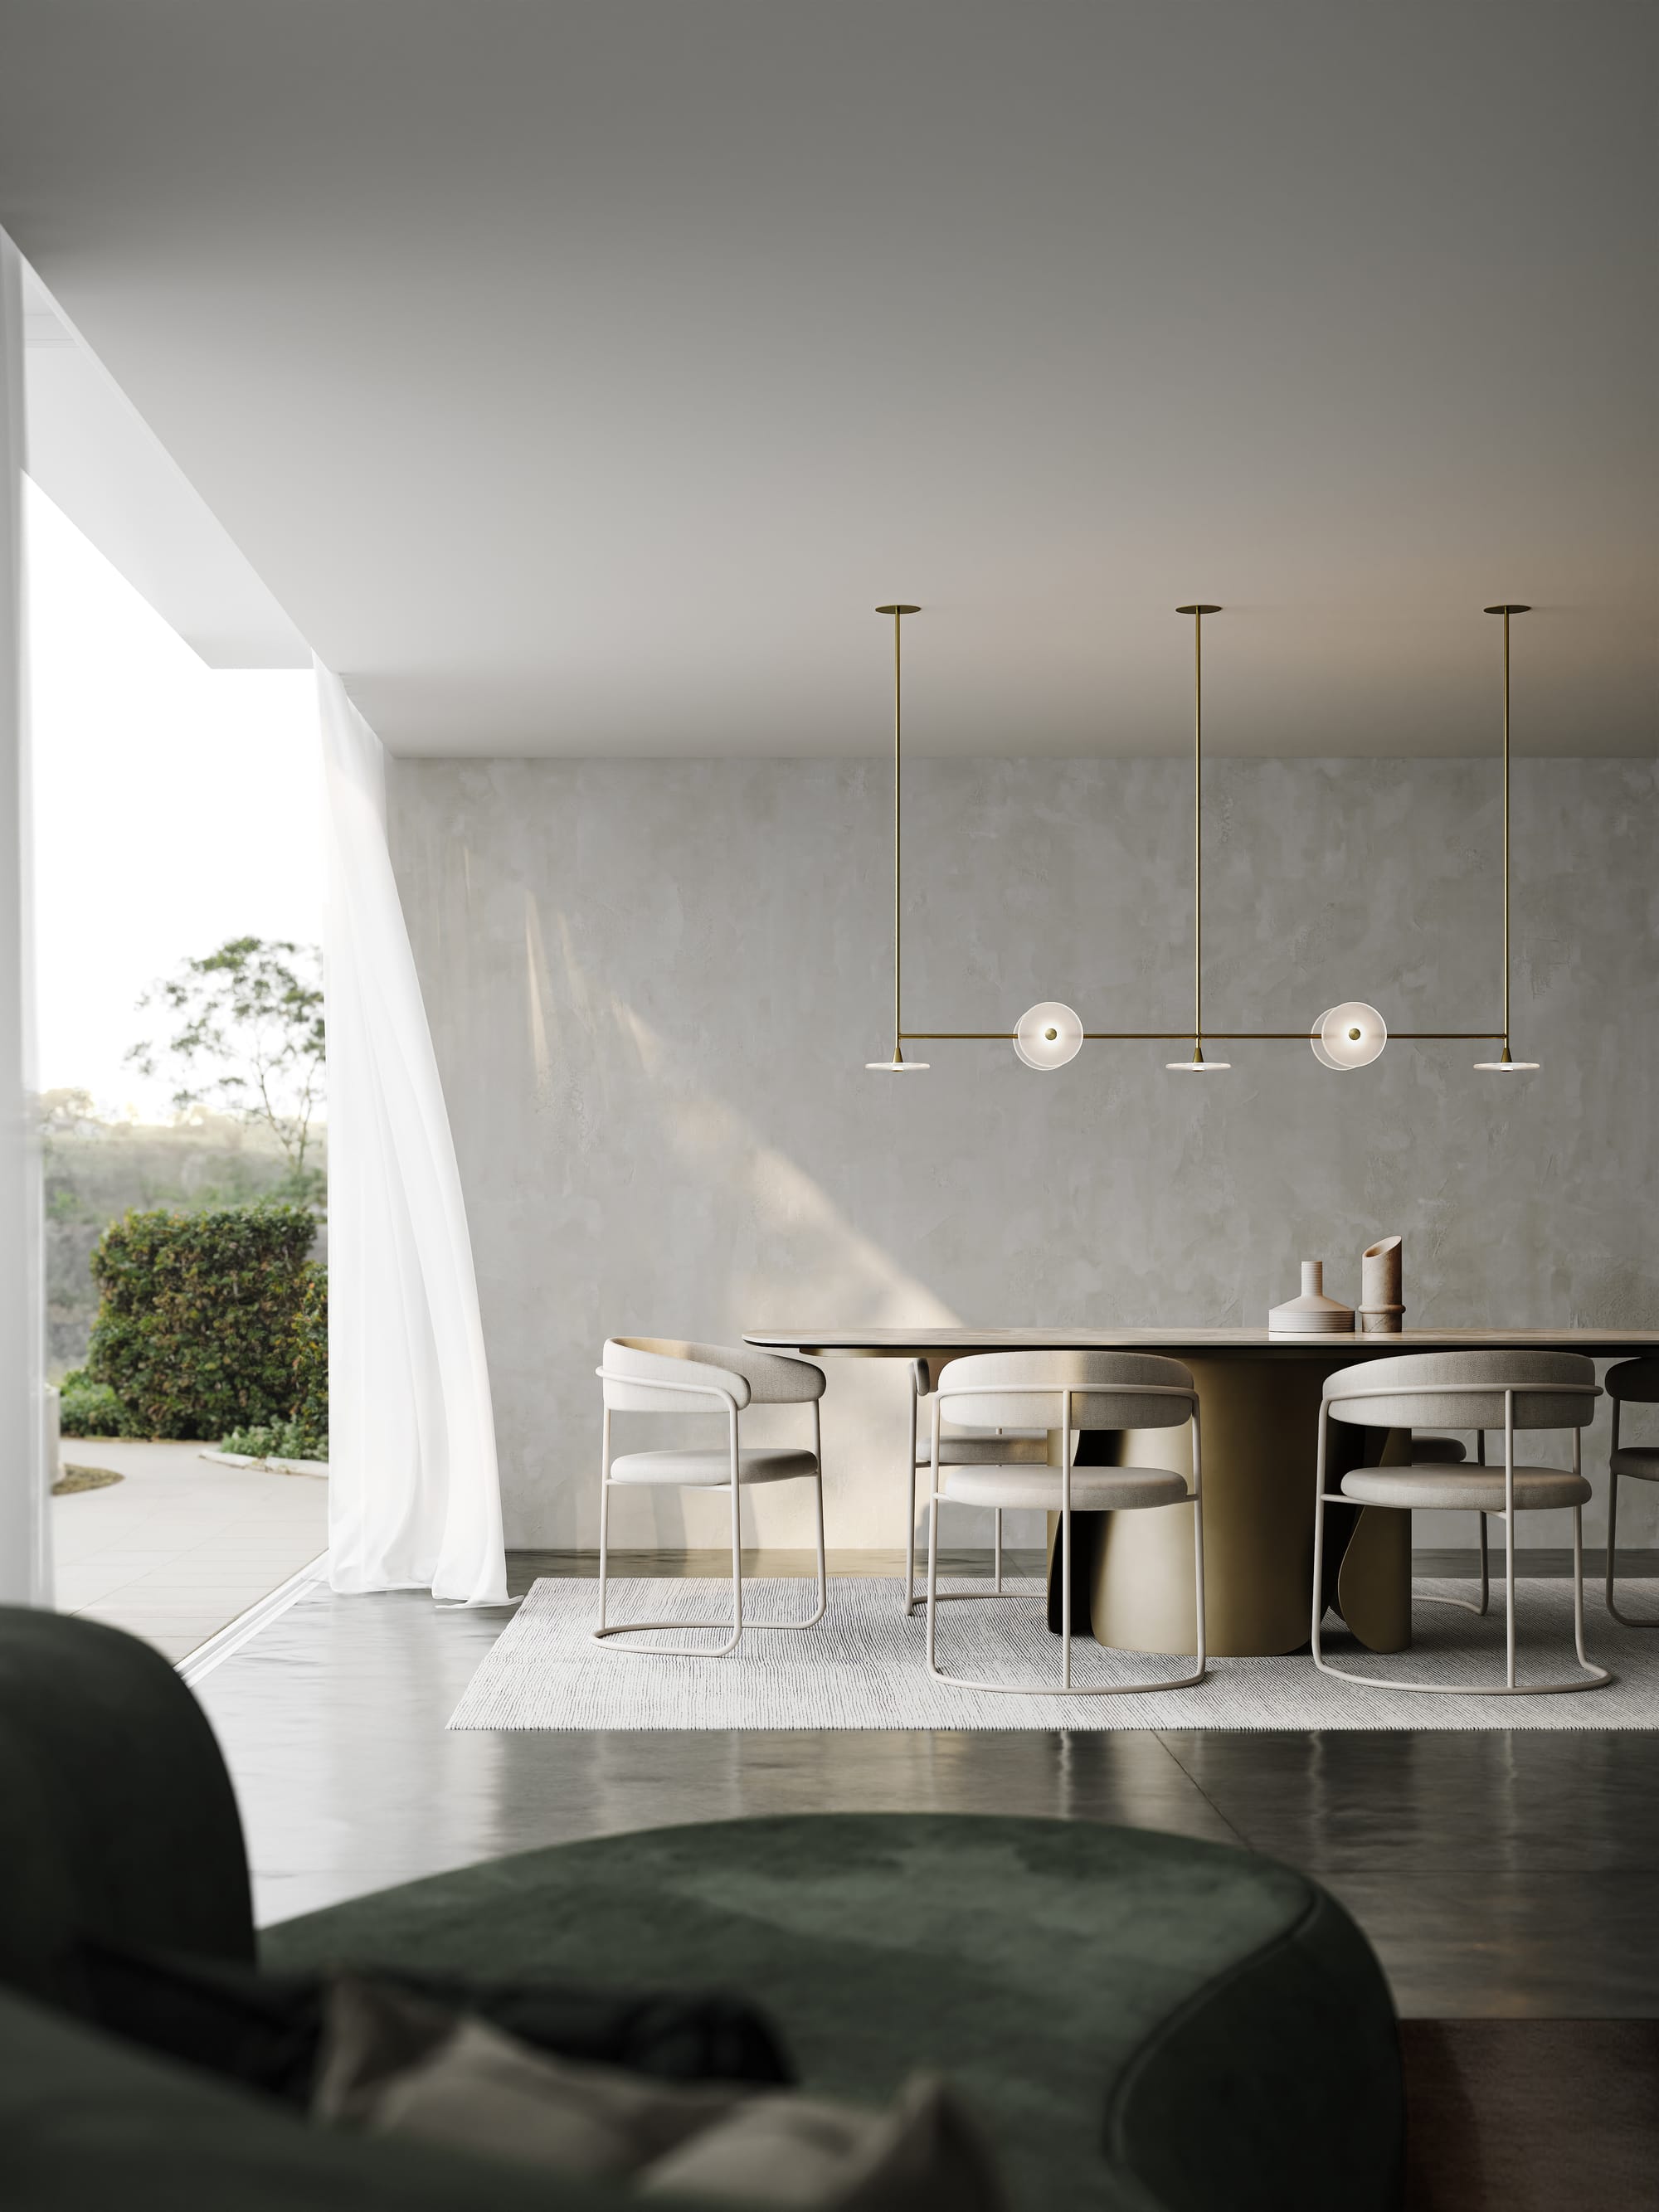 Coral Linear Rod 7 Pendant Light by SOKTAS. Copyright of SOKTAS. Simple linear pendant light hanging above abstract gold dining table with simple white chairs. 